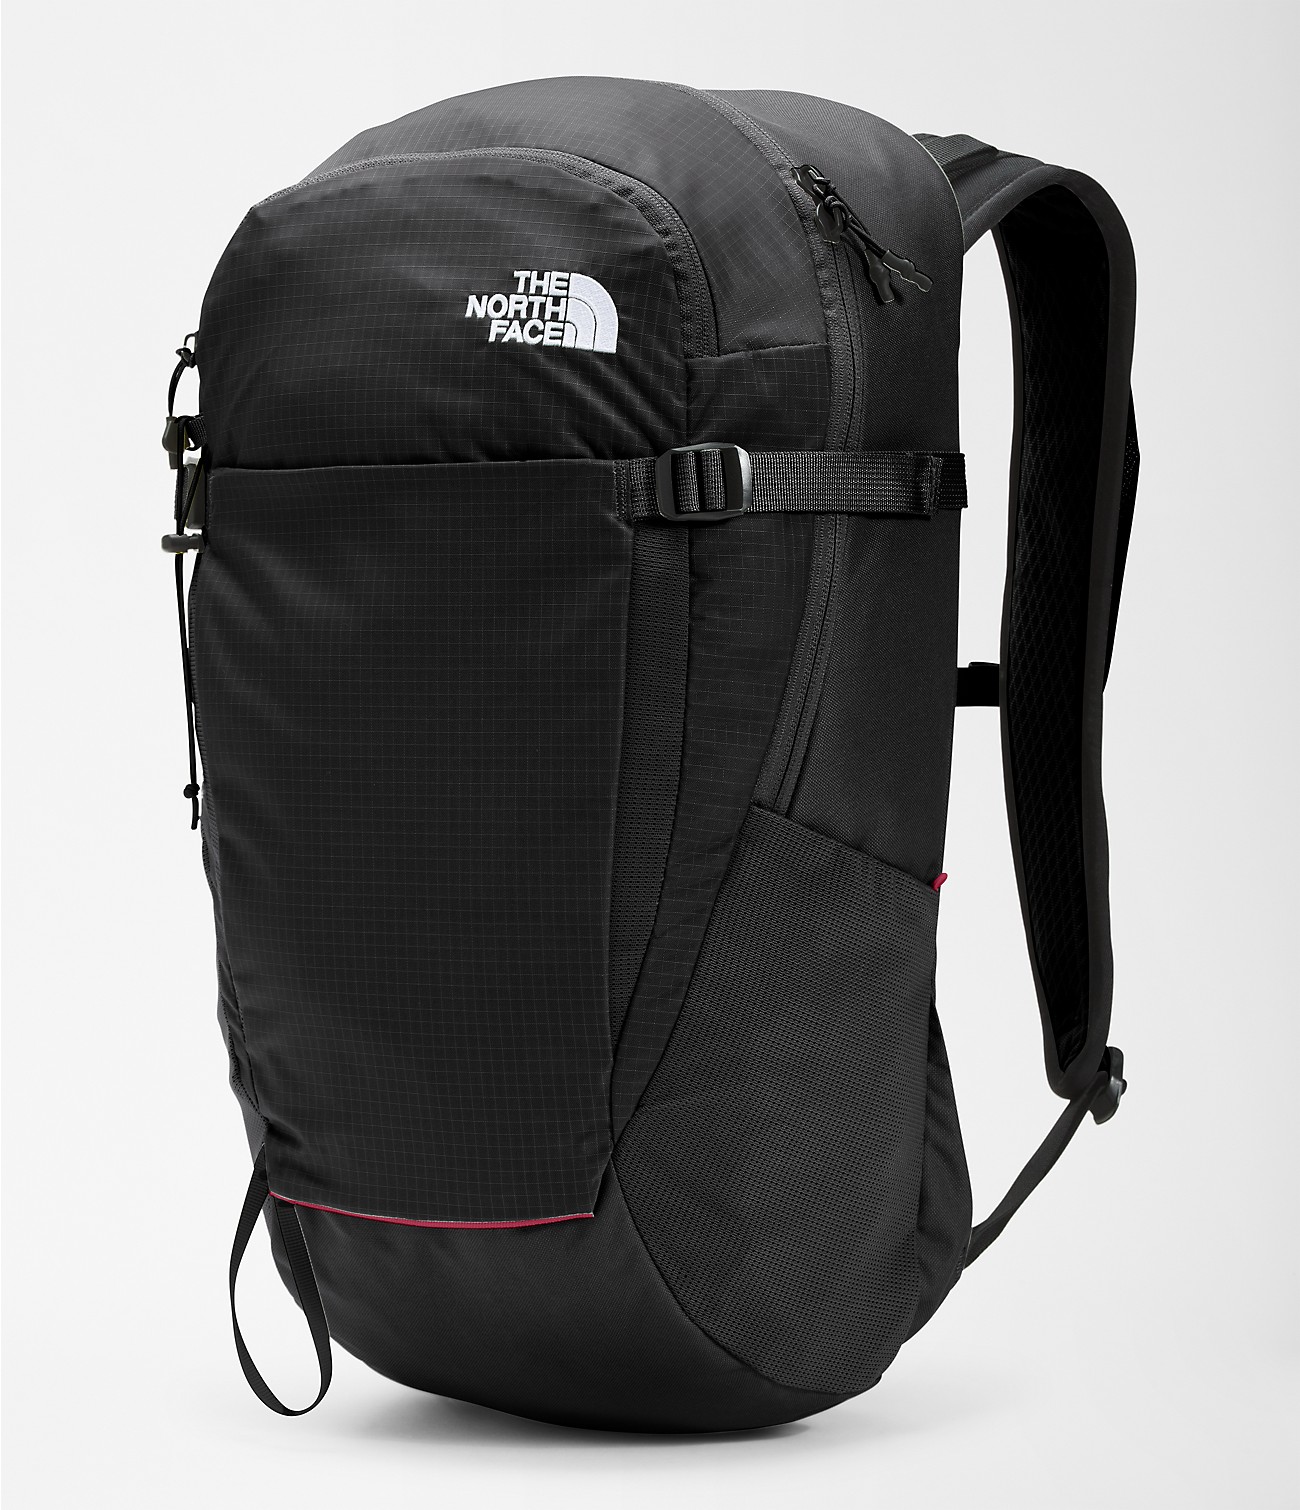 Unlock Wilderness' choice in the Decathlon Vs North Face comparison, the Basin 24 by The North Face